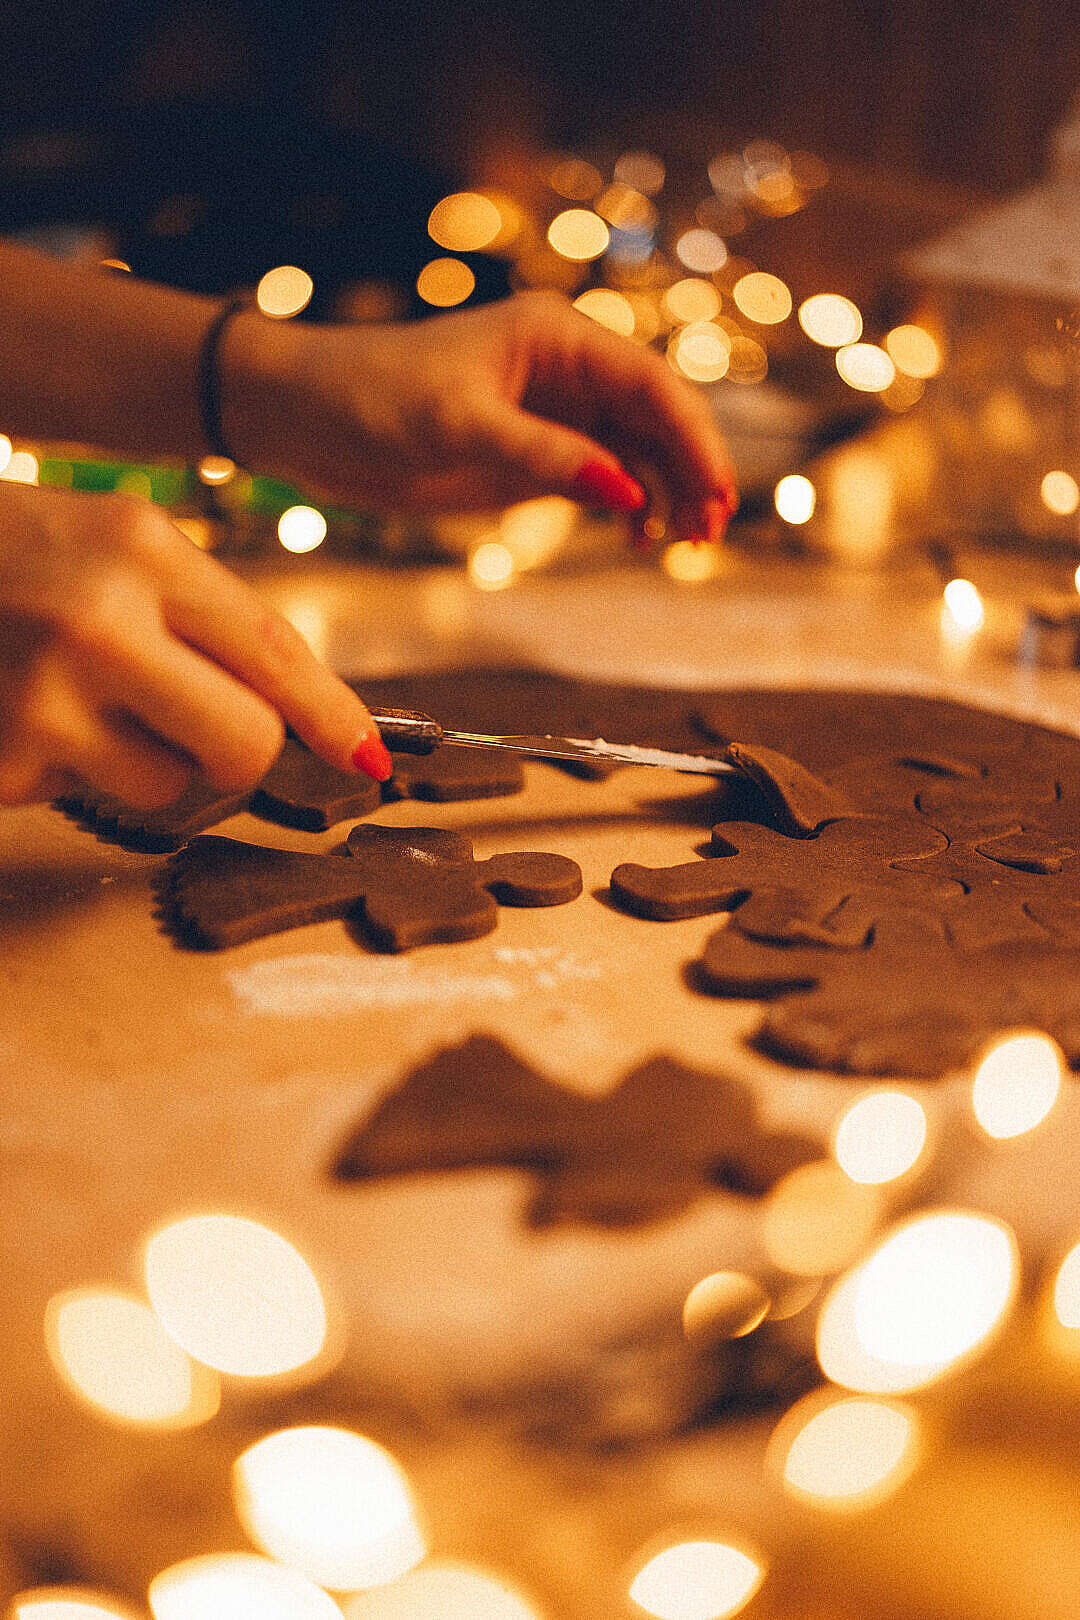 Download Woman Cutting Gingerbread Cookies FREE Stock Photo